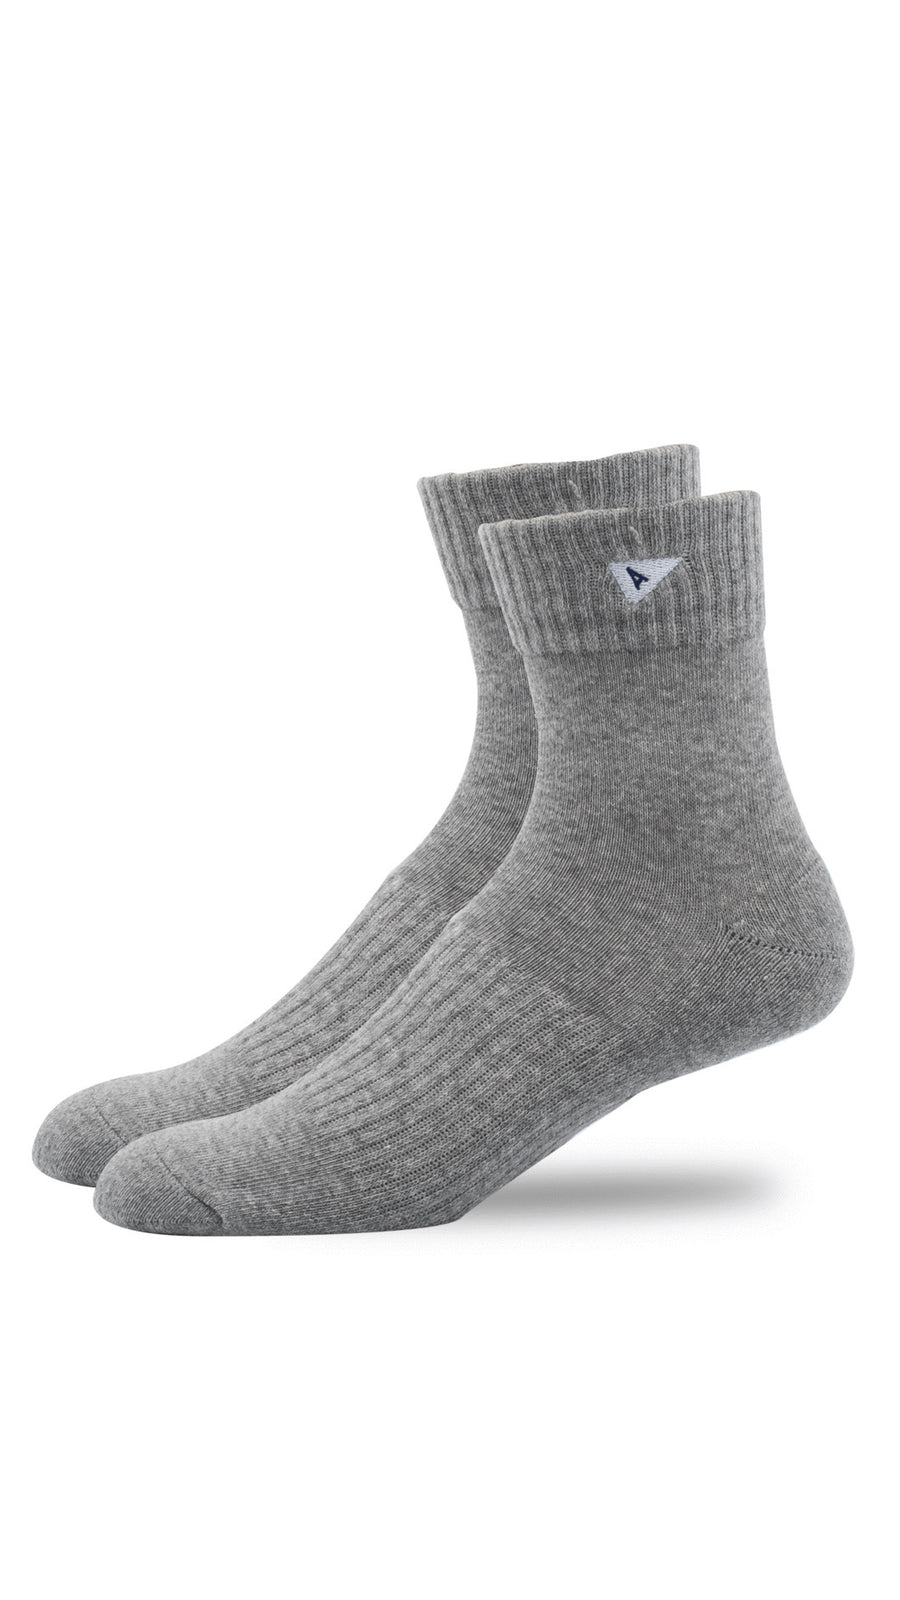 Grey Ankle Socks by Arvin Goods